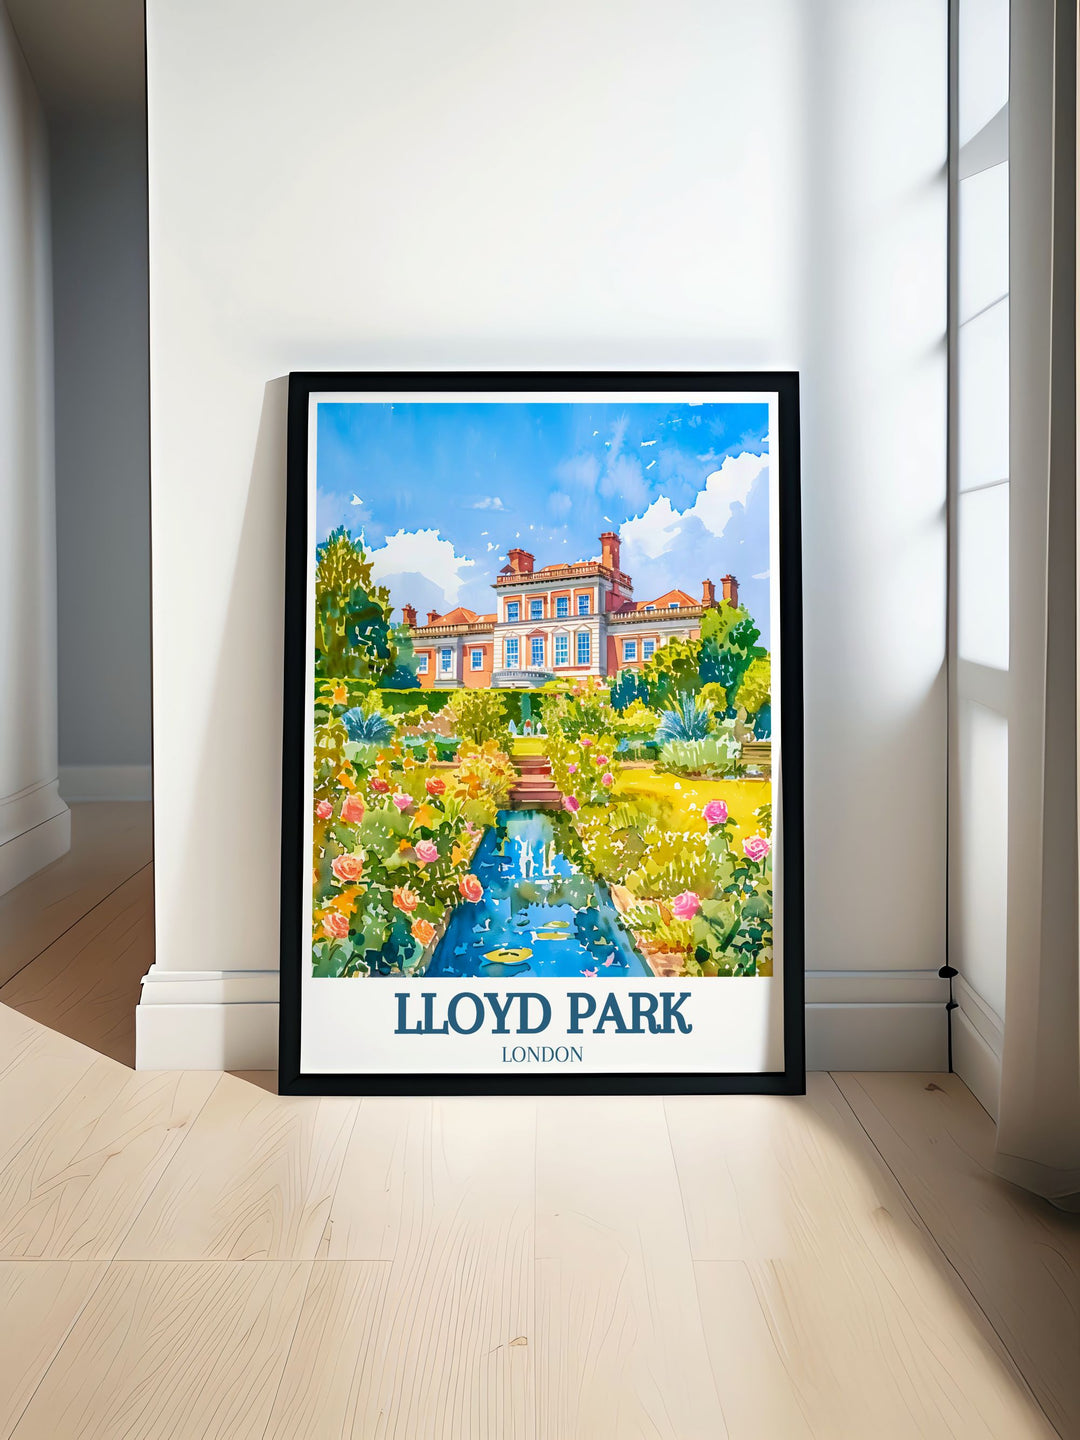 William Morris gallery vintage travel print featuring Lloyd Park in East London. Detailed illustration of the rose garden surrounded by lush greenery. Perfect for London travel enthusiasts and art collectors. Adds elegance to any home decor with a touch of history.